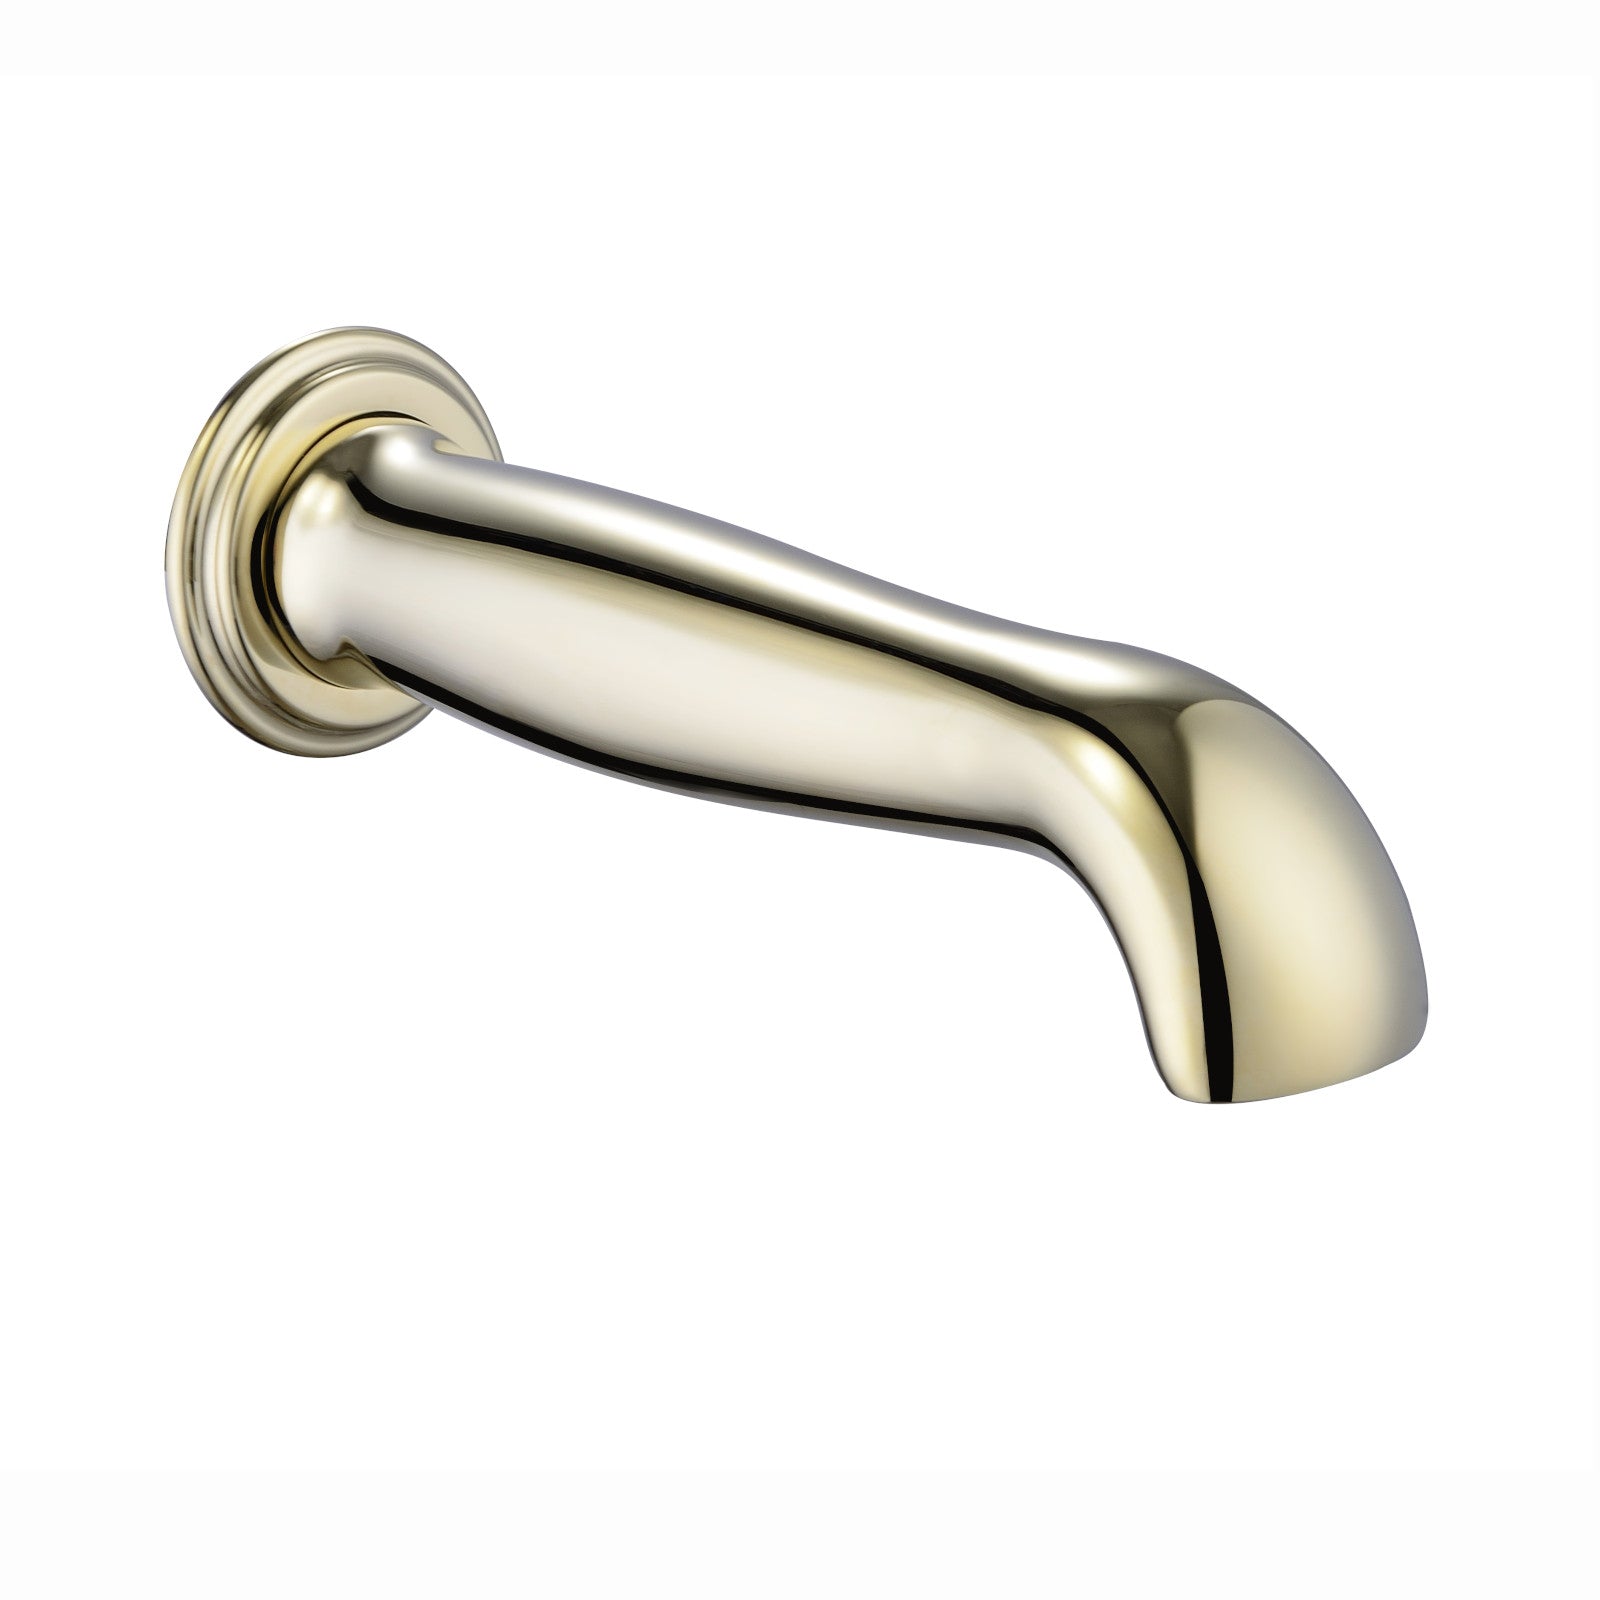 Traditional bath or basin spout wall mounted - English gold - Showers